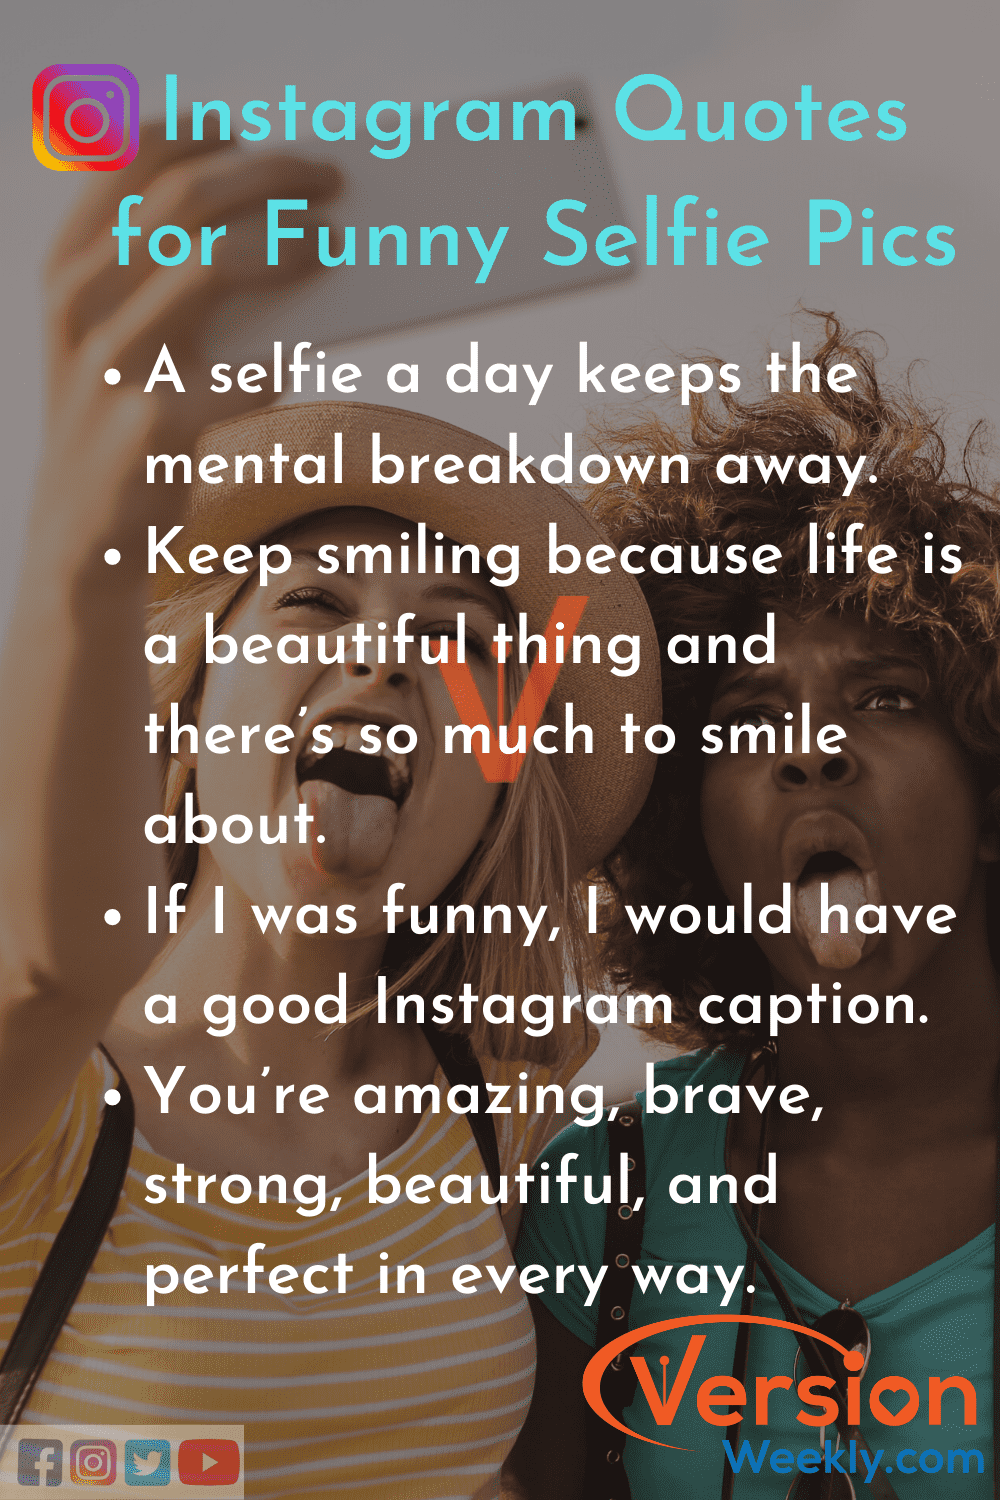 Funny selfie quotes for insta pics